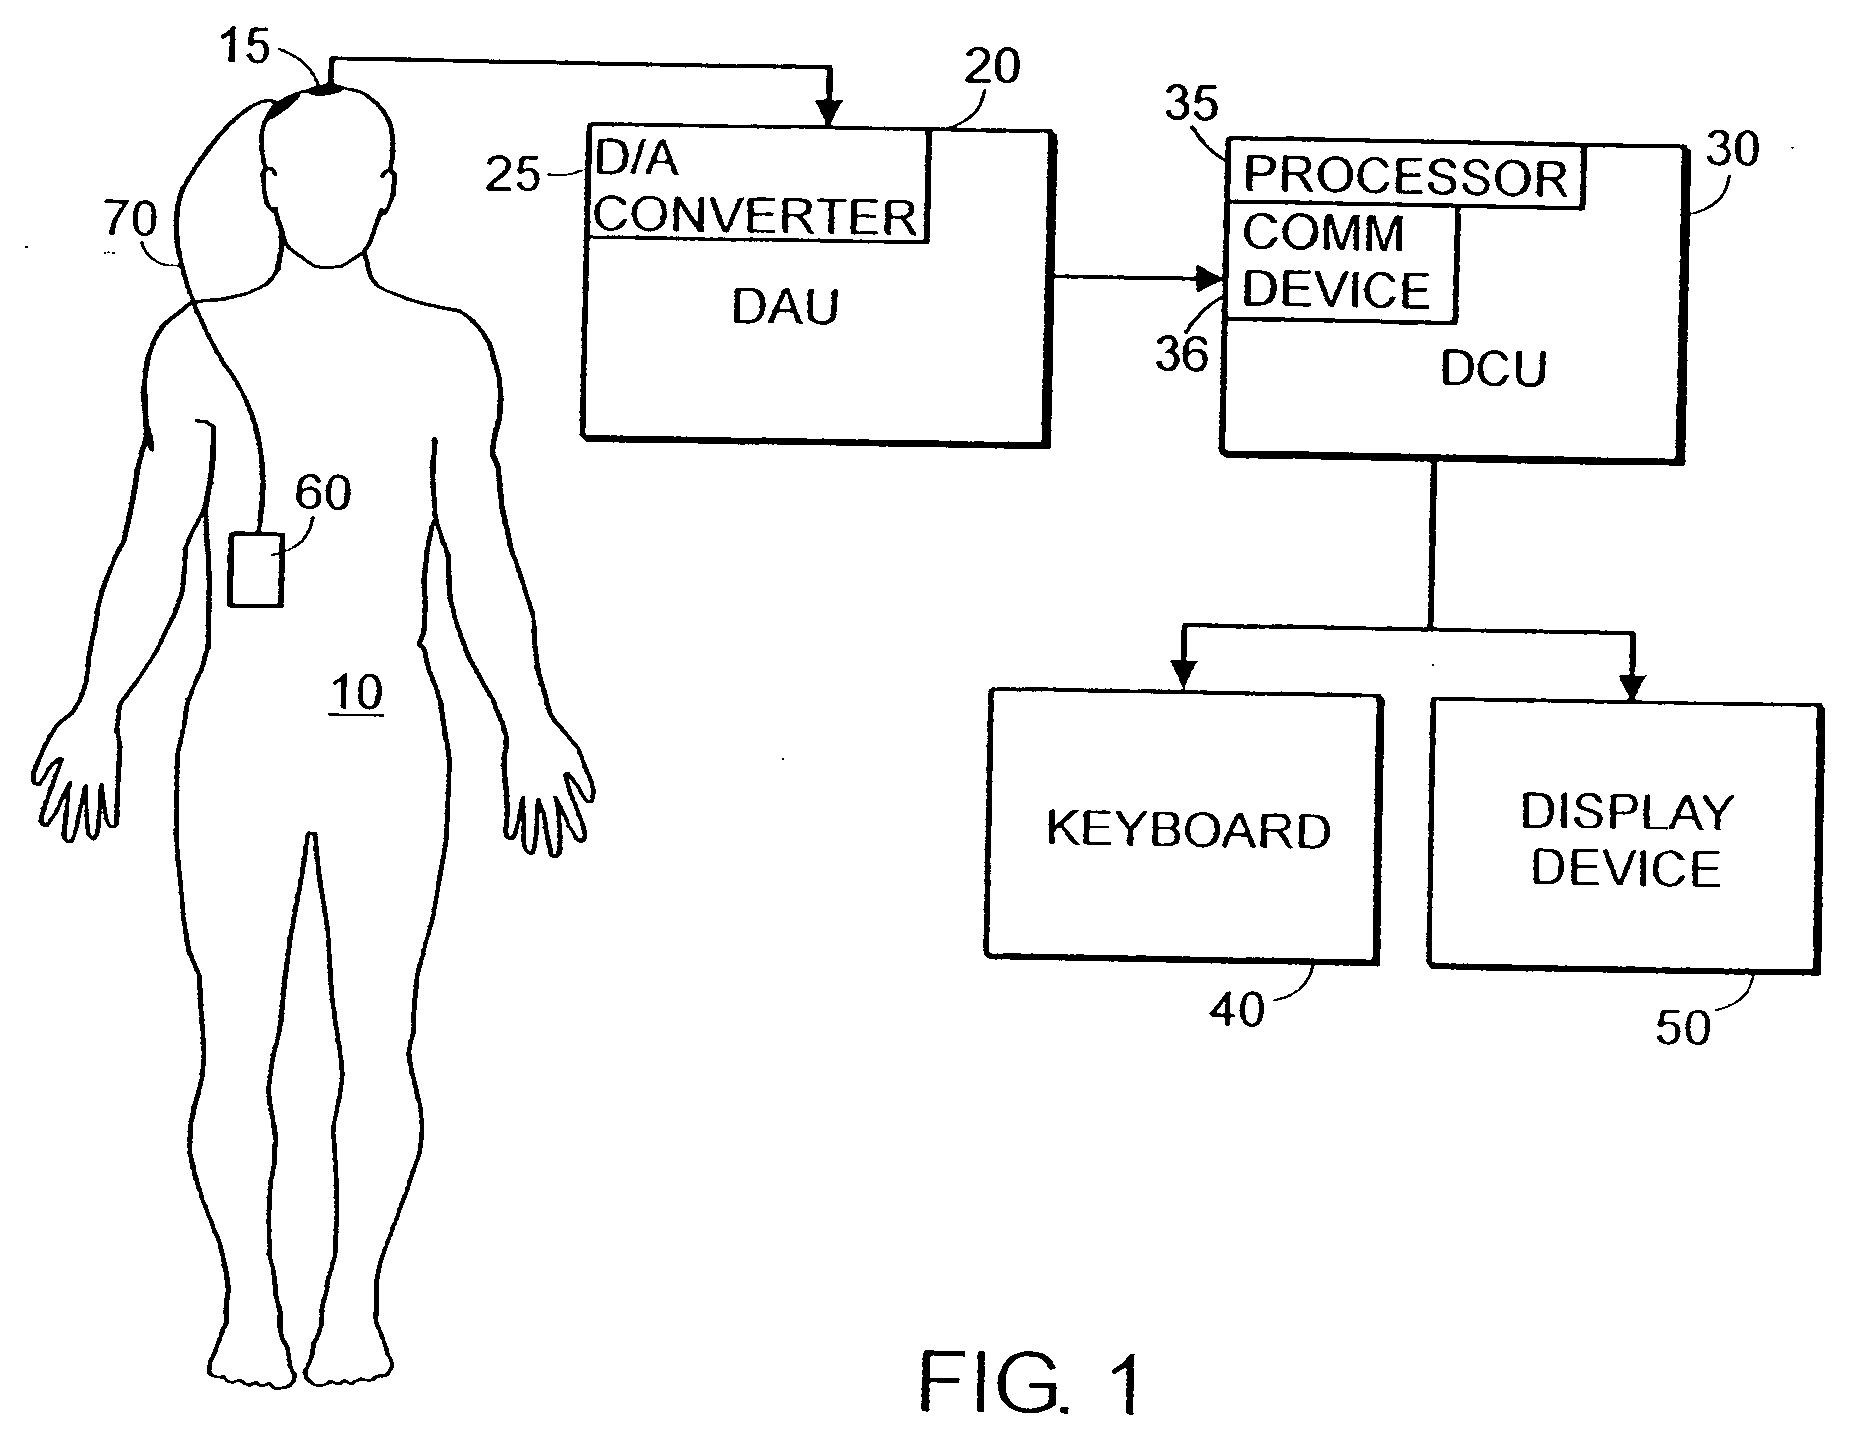 System and method of prediction of response to neurological treatment using the electroencephalogram